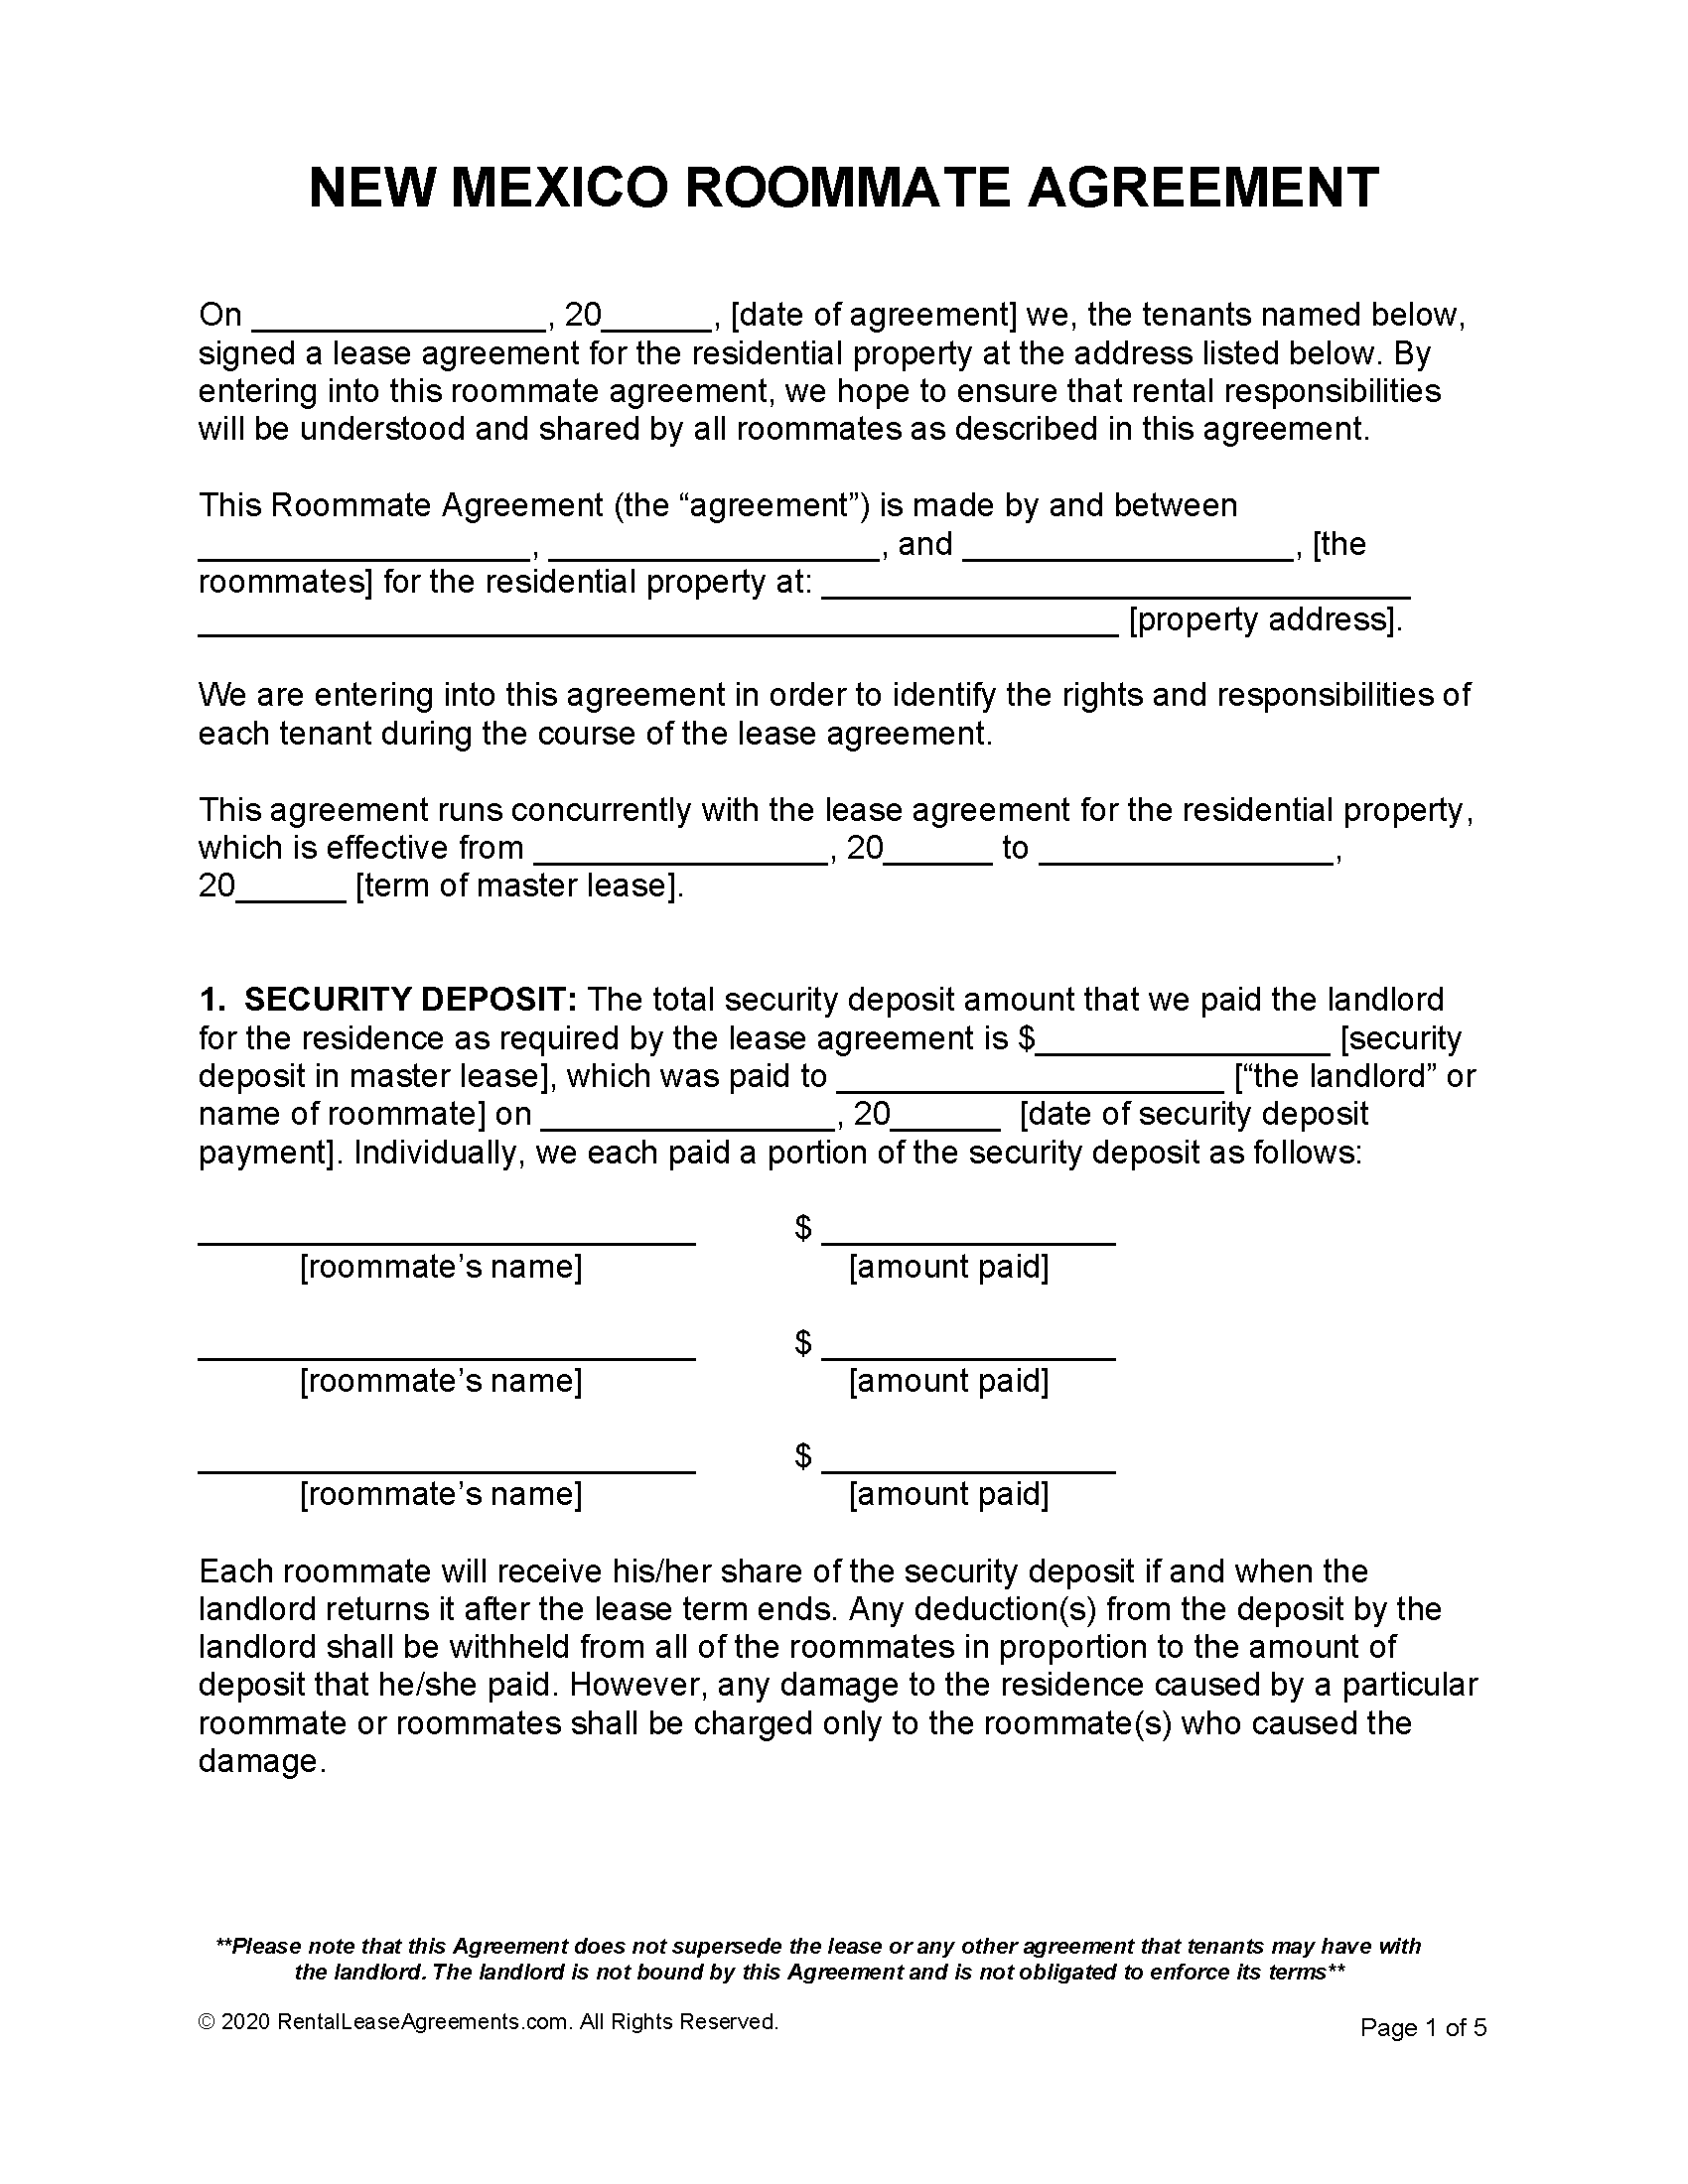 free-new-mexico-roommate-agreement-pdf-ms-word